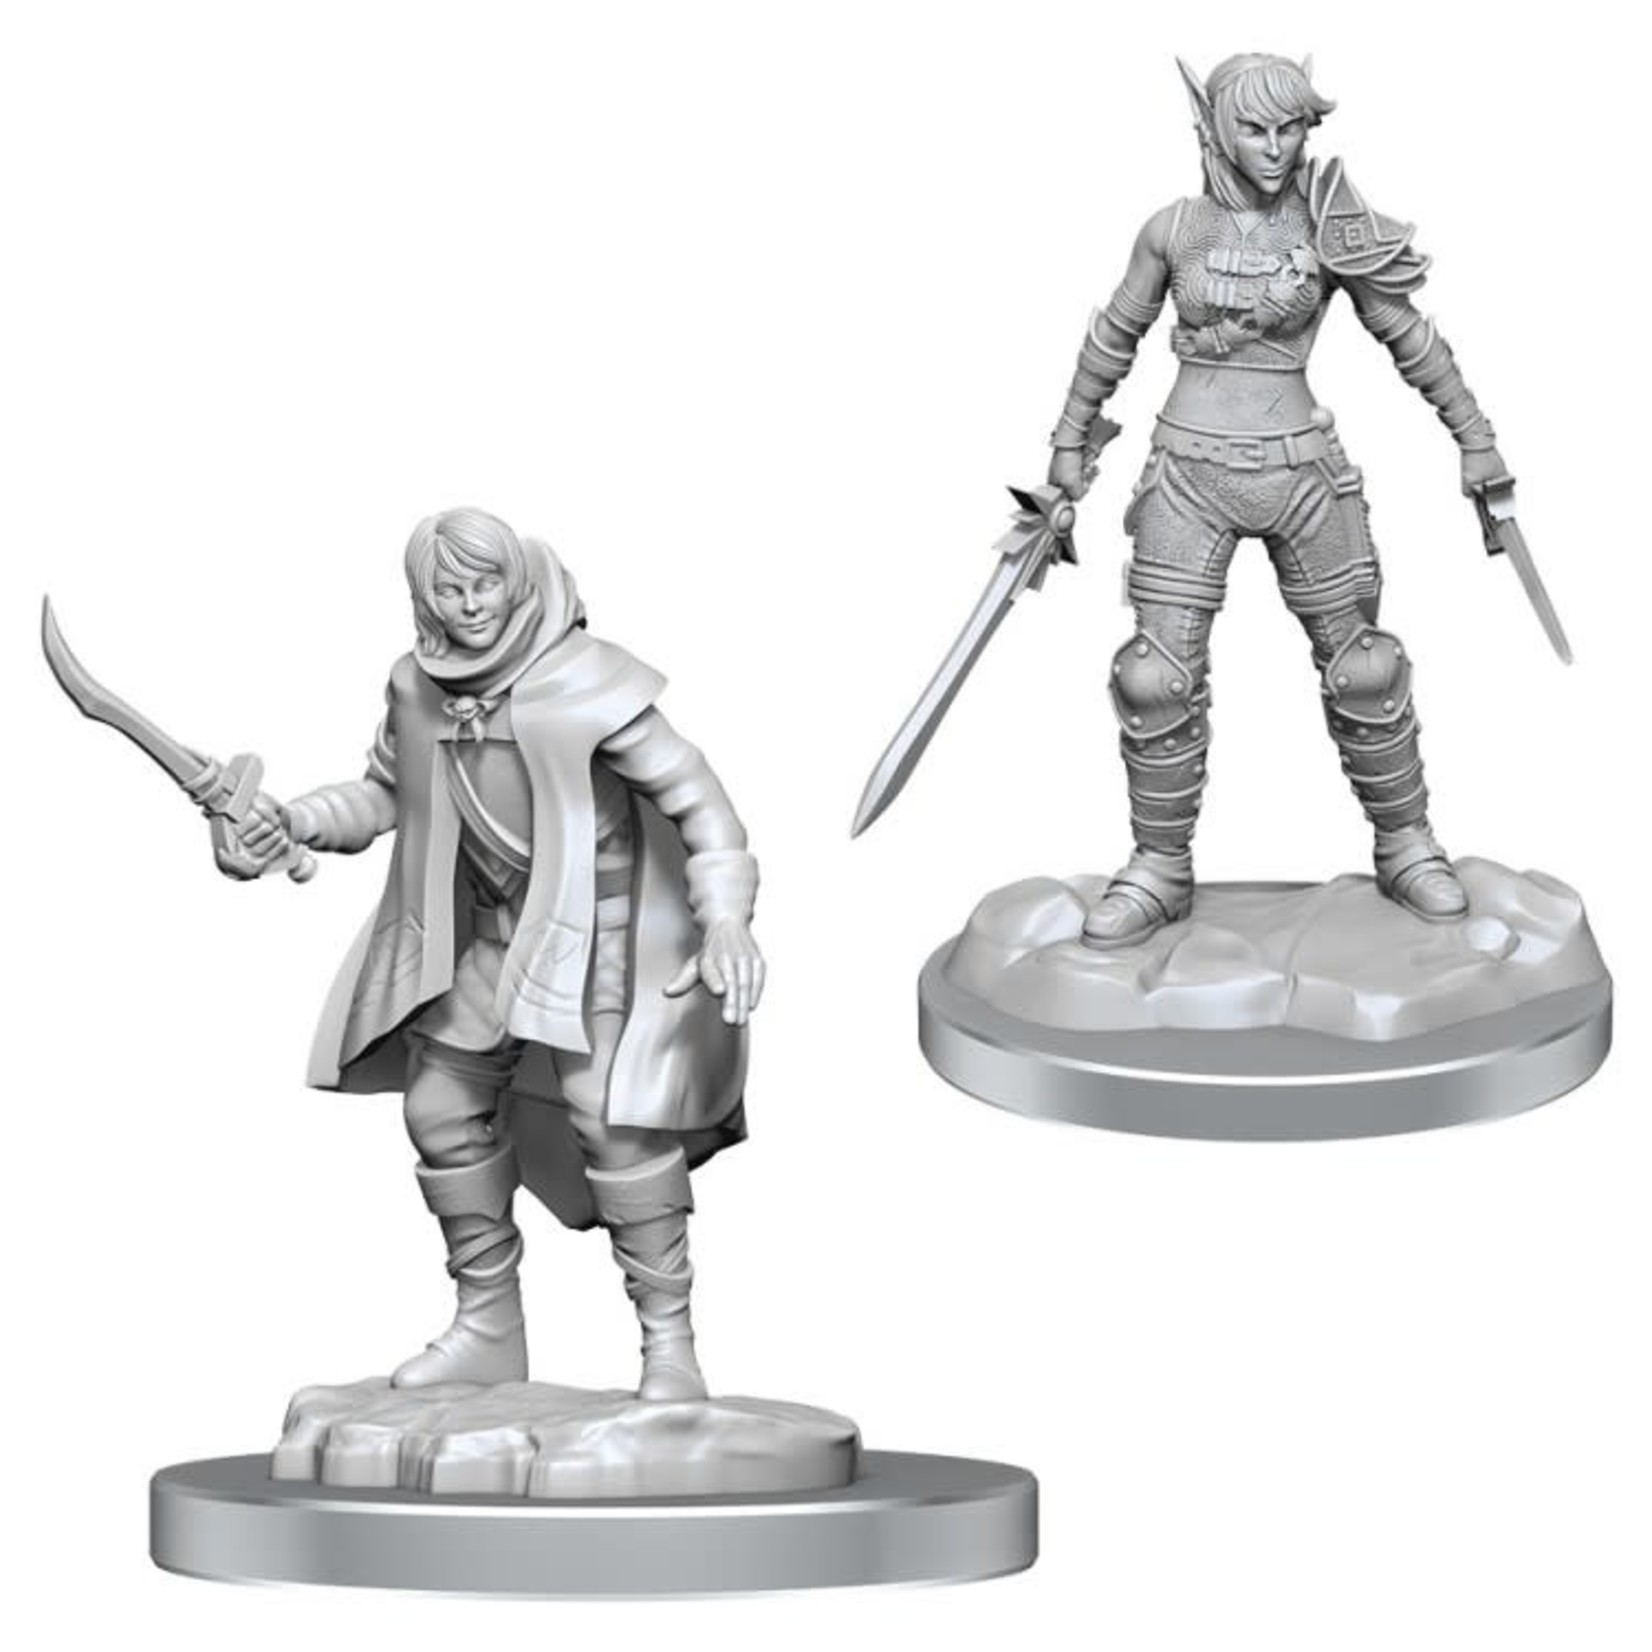 WizKids Dungeons and Dragons Nolzur's Marvelous Minis Elf Rogue and Half-Elf Rogue Protege